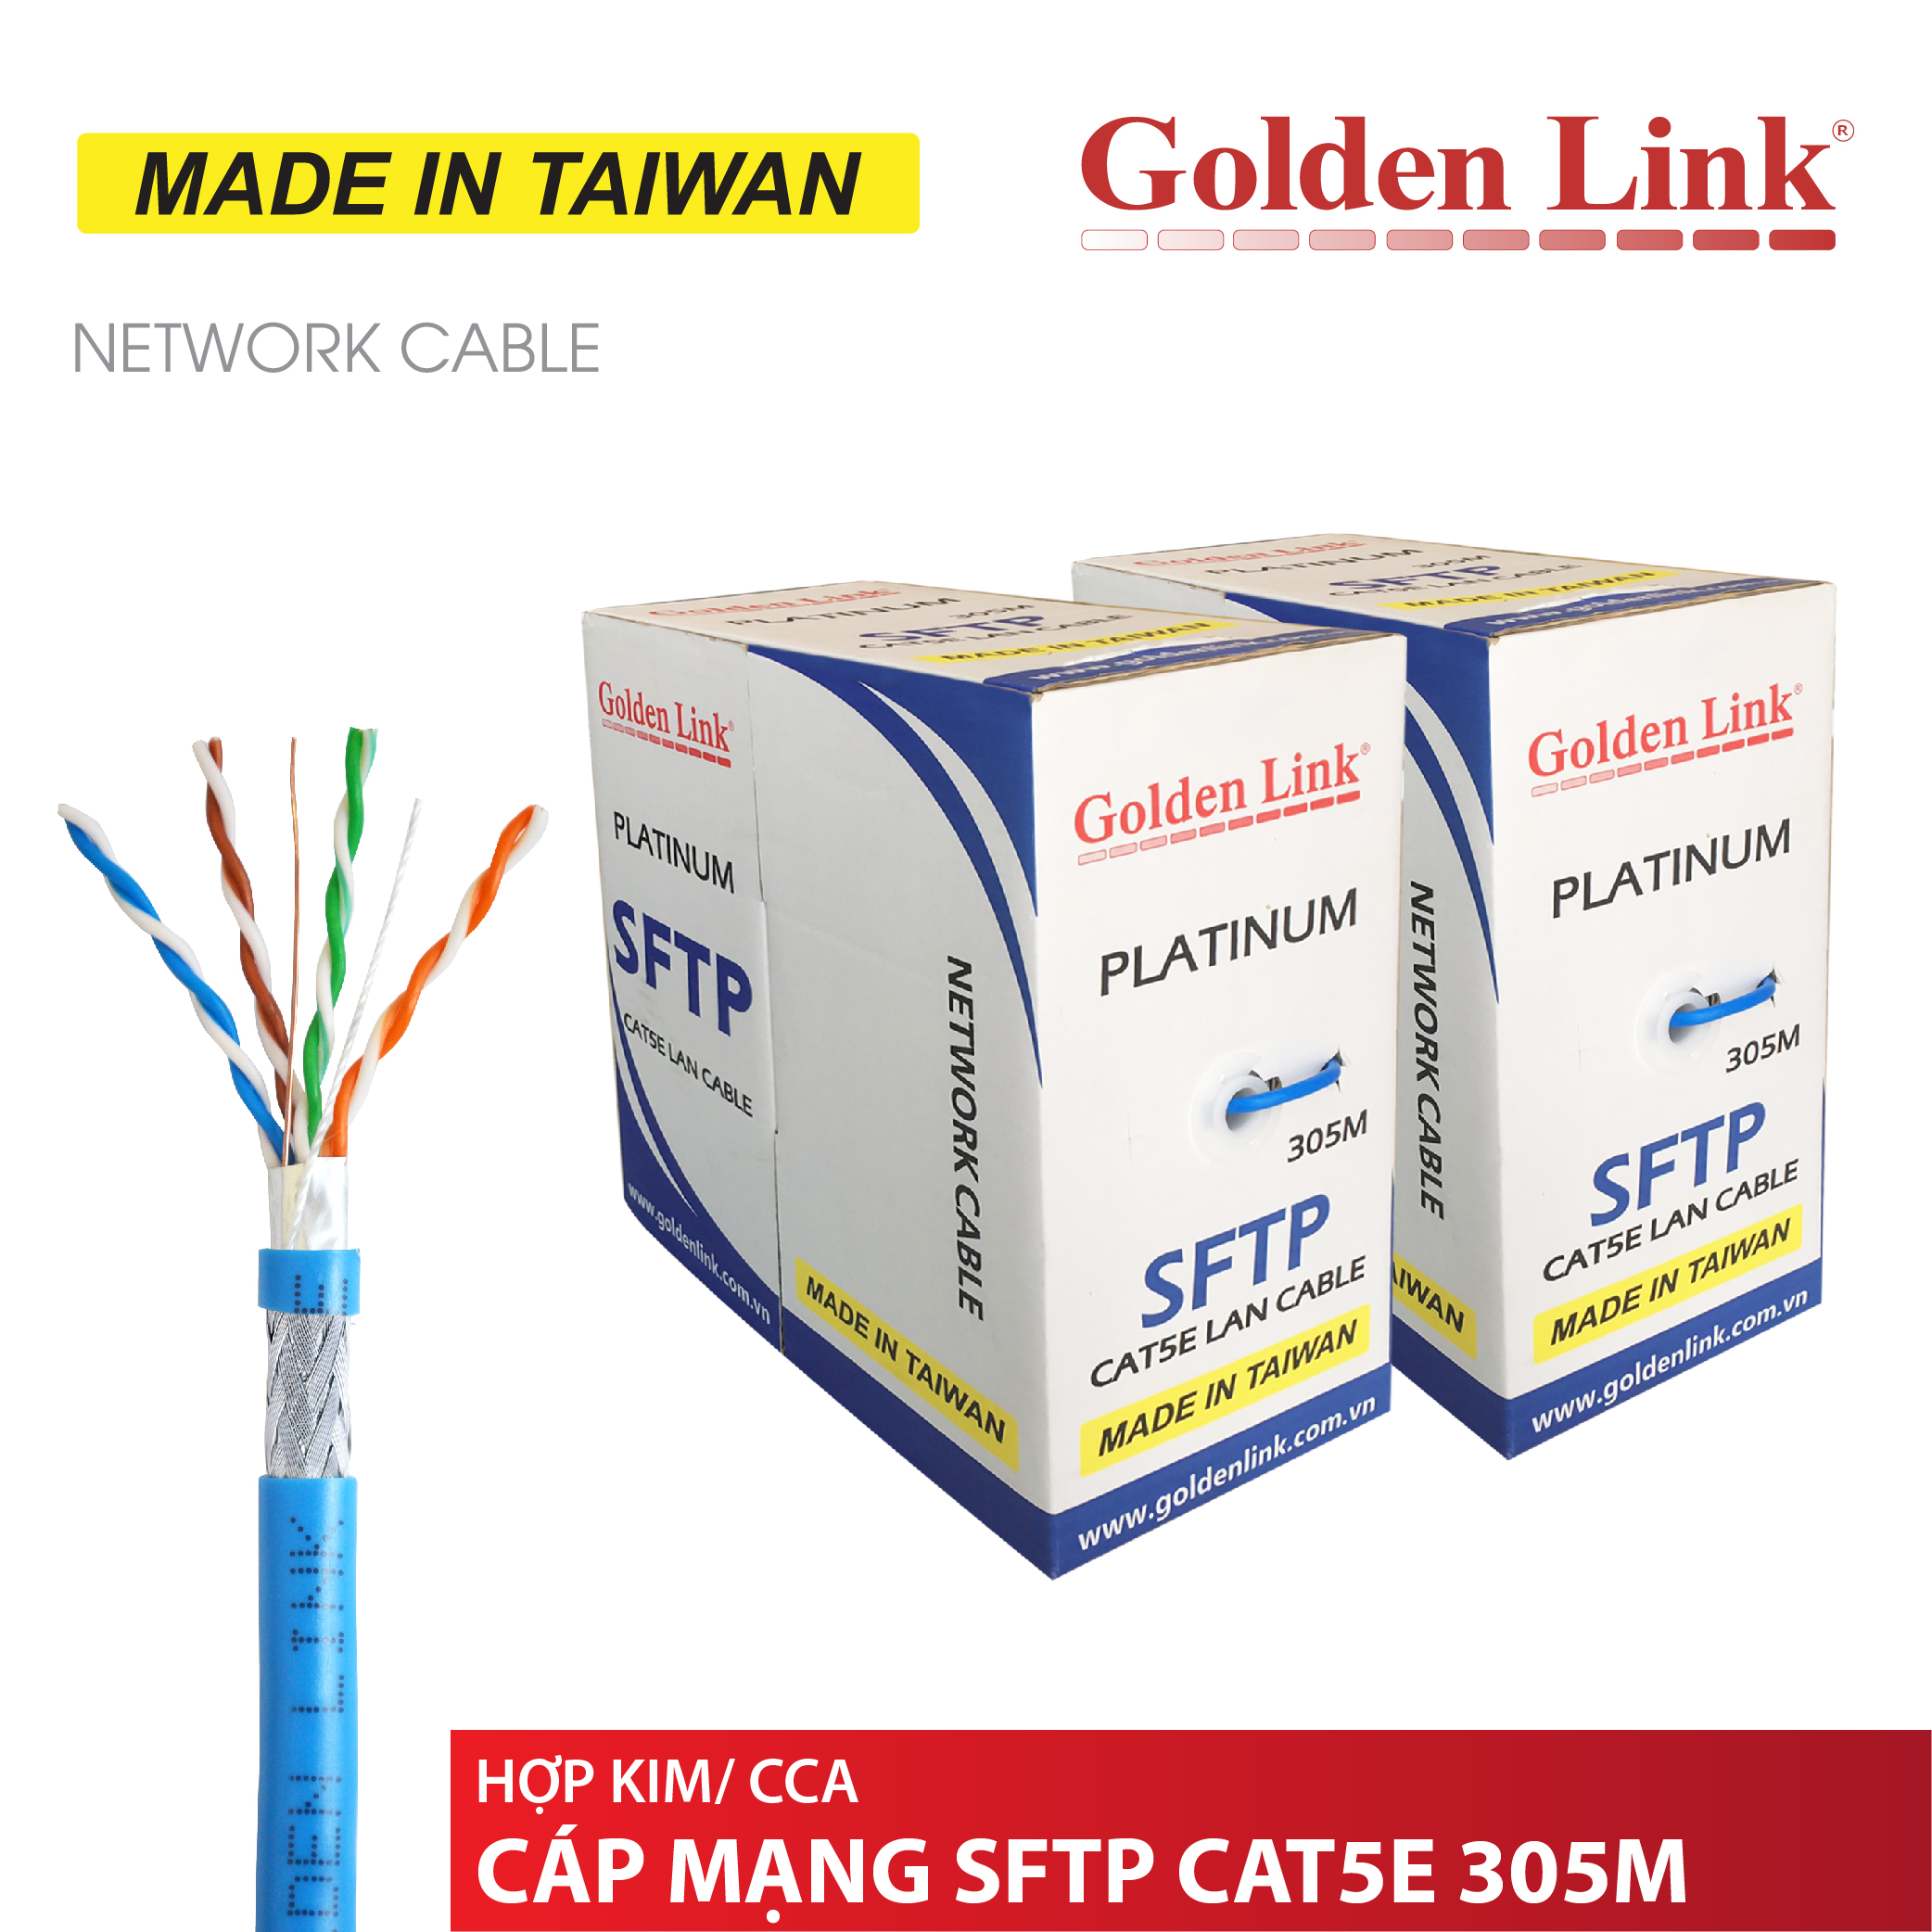 Golden Link Platinum SFTP CAT 5E network cable Made in Taiwan